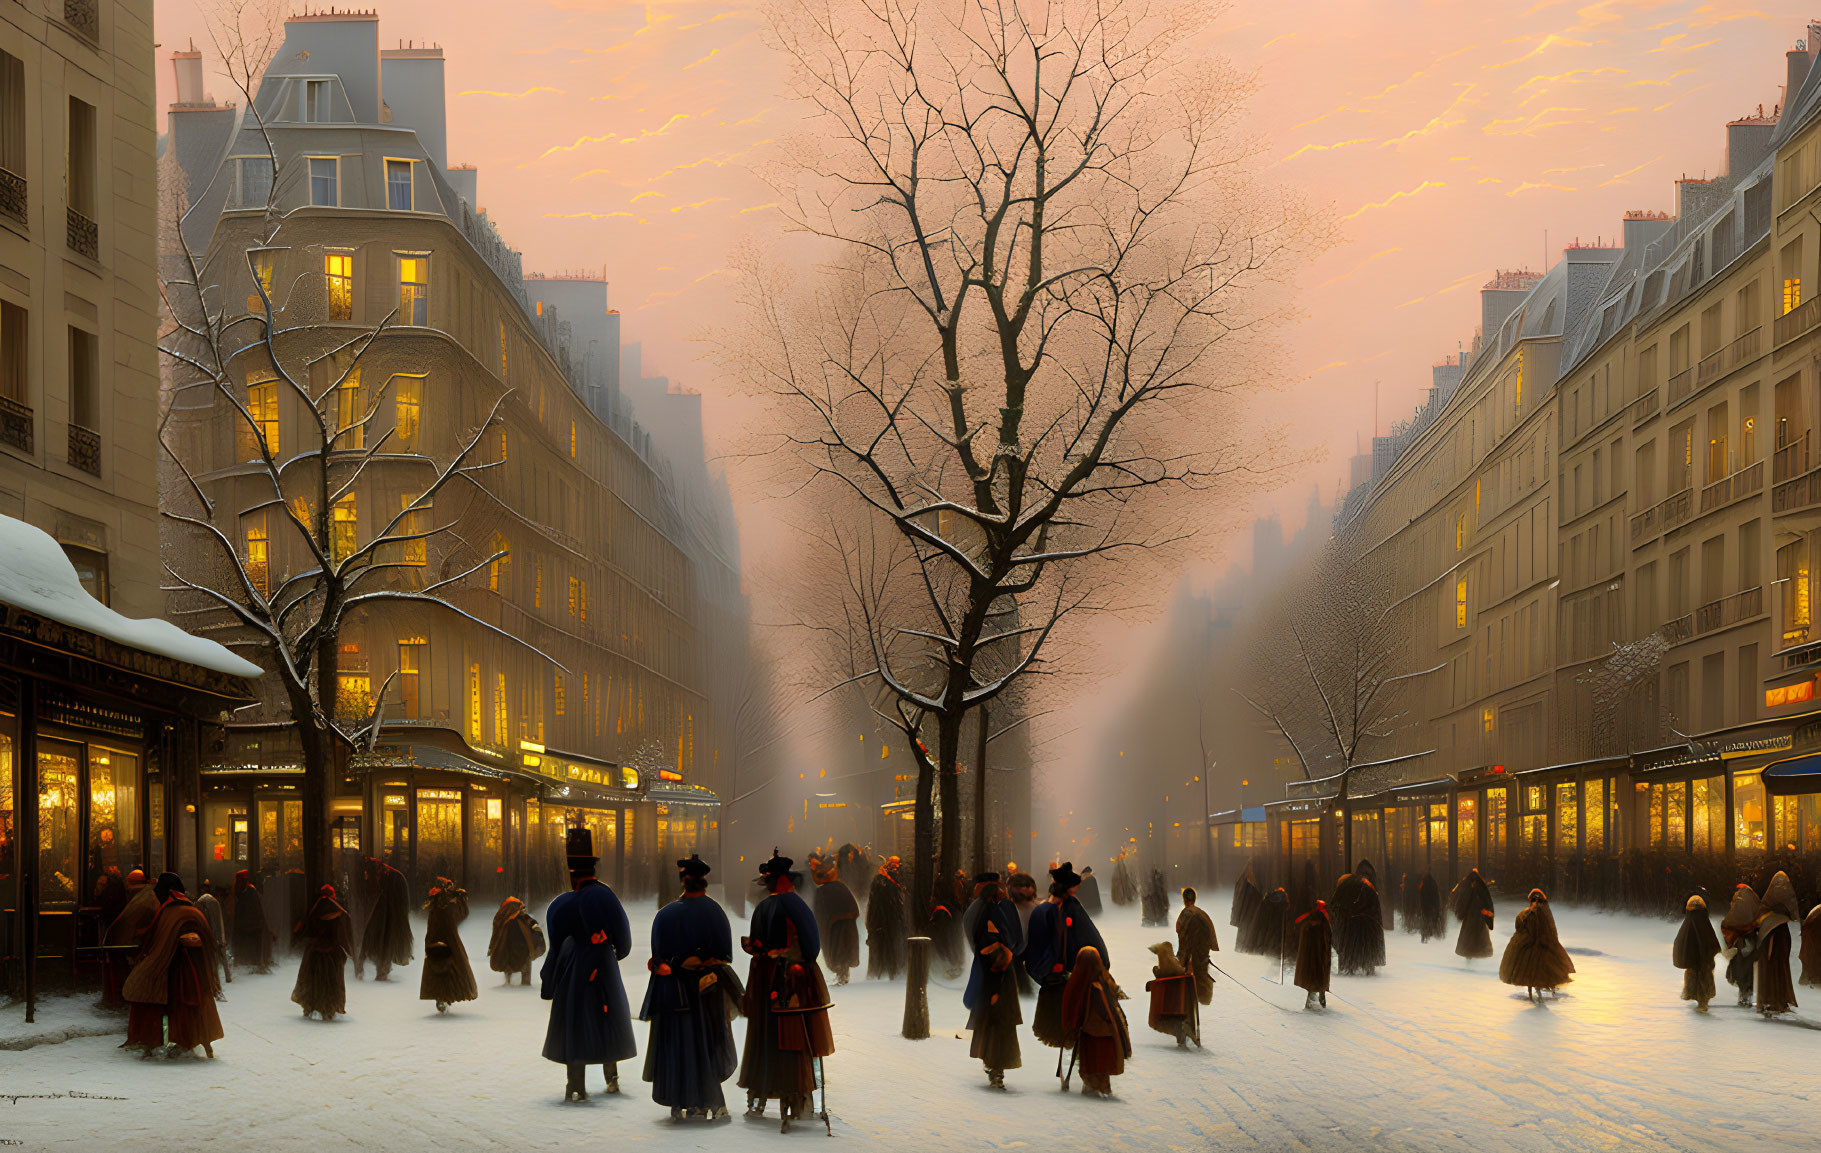 Vintage-clad people on twilight city street with glowing buildings and bare trees